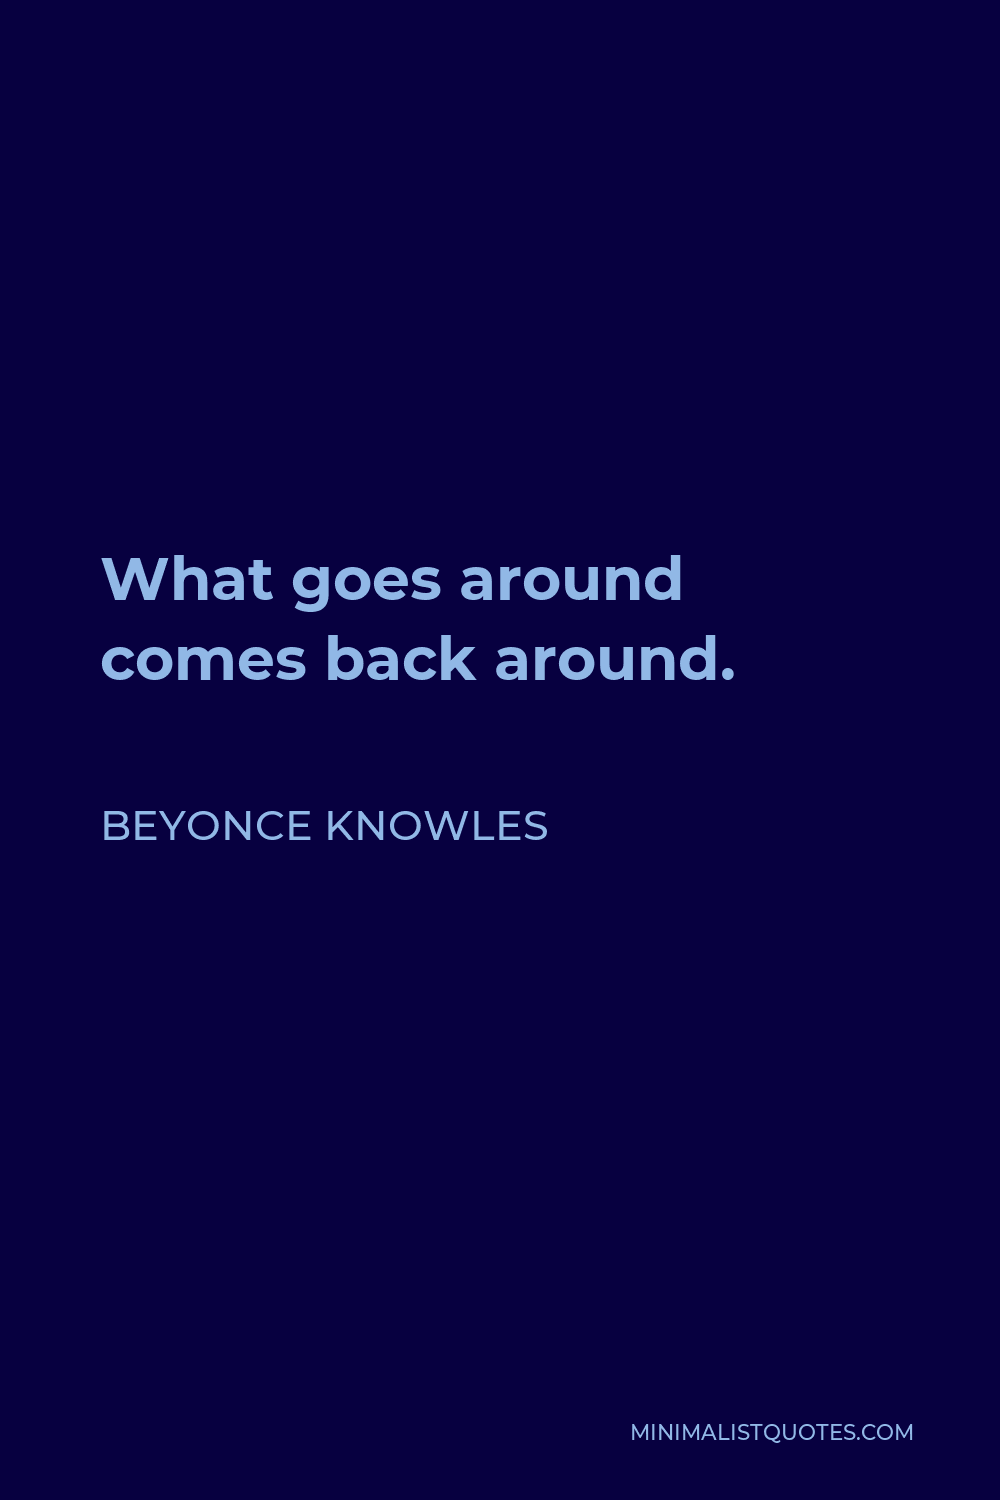 Beyonce Knowles Quote - What goes around comes back around.